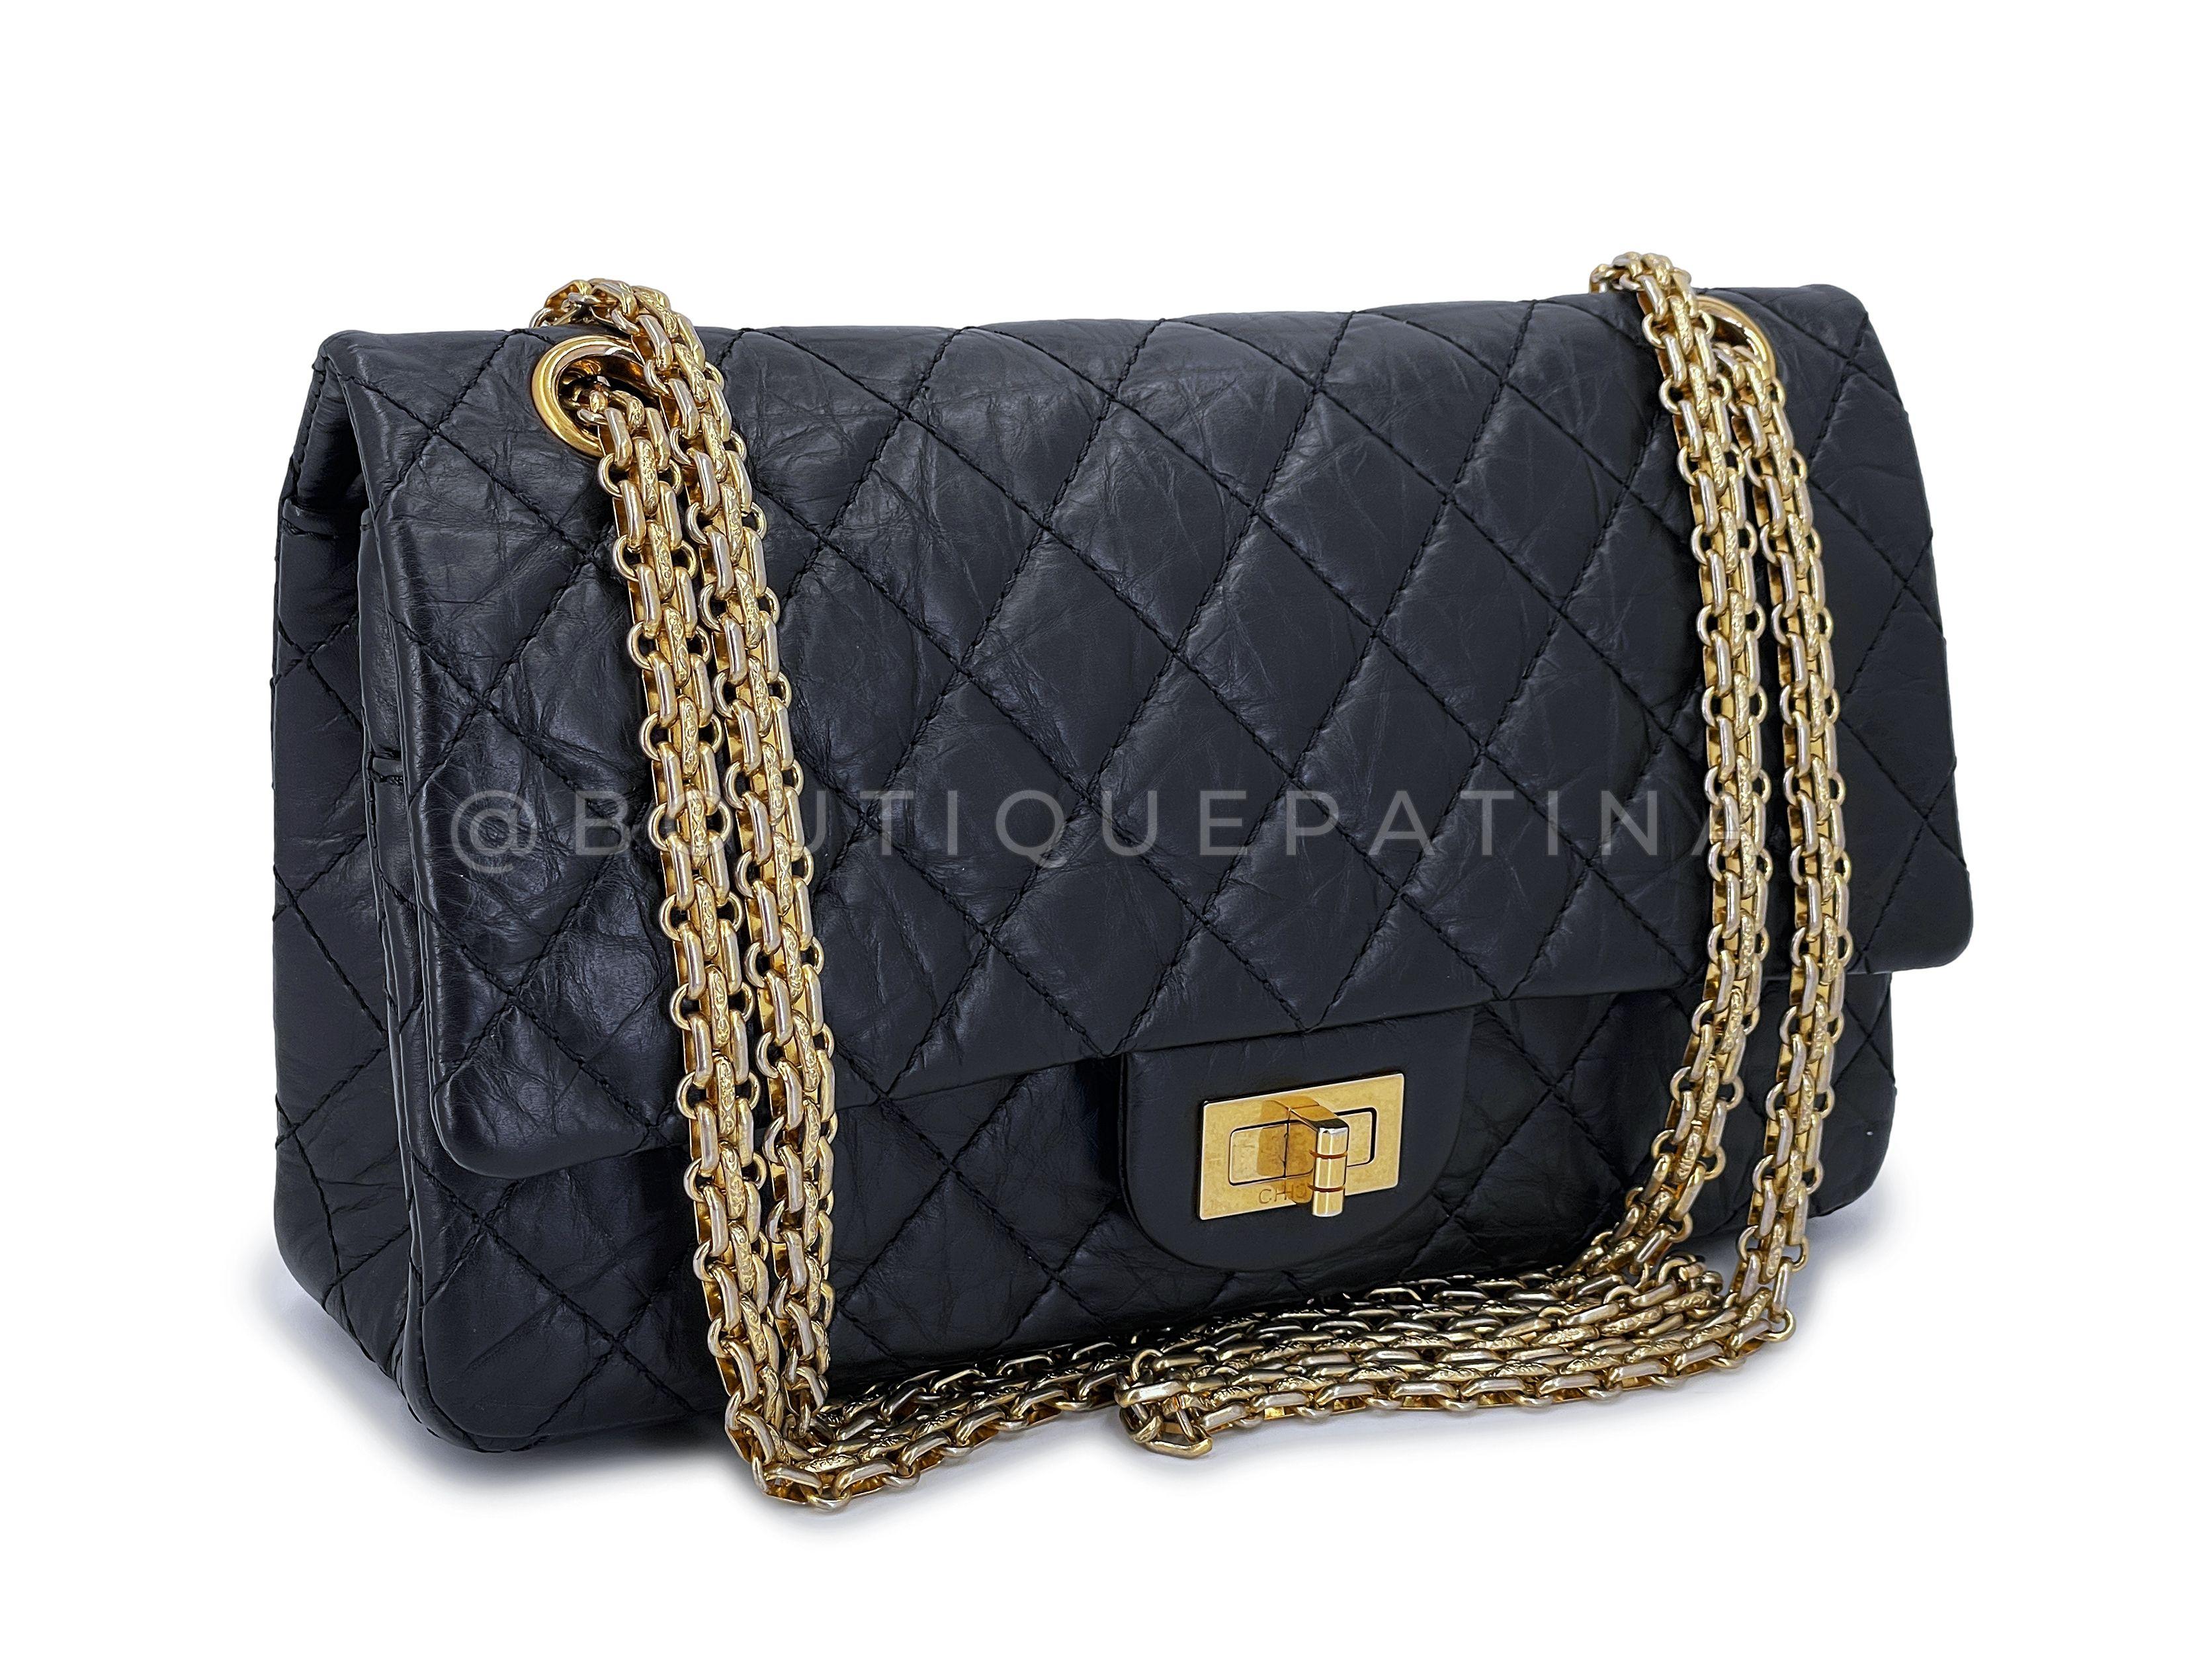 Store item: 67274
Chanel collectors know how hard it is to find reissue flaps in pristine condition, with sleek panels and no creasing. Established 20 years ago, Boutique Patina has specialized in sourcing and curating the best condition preowned